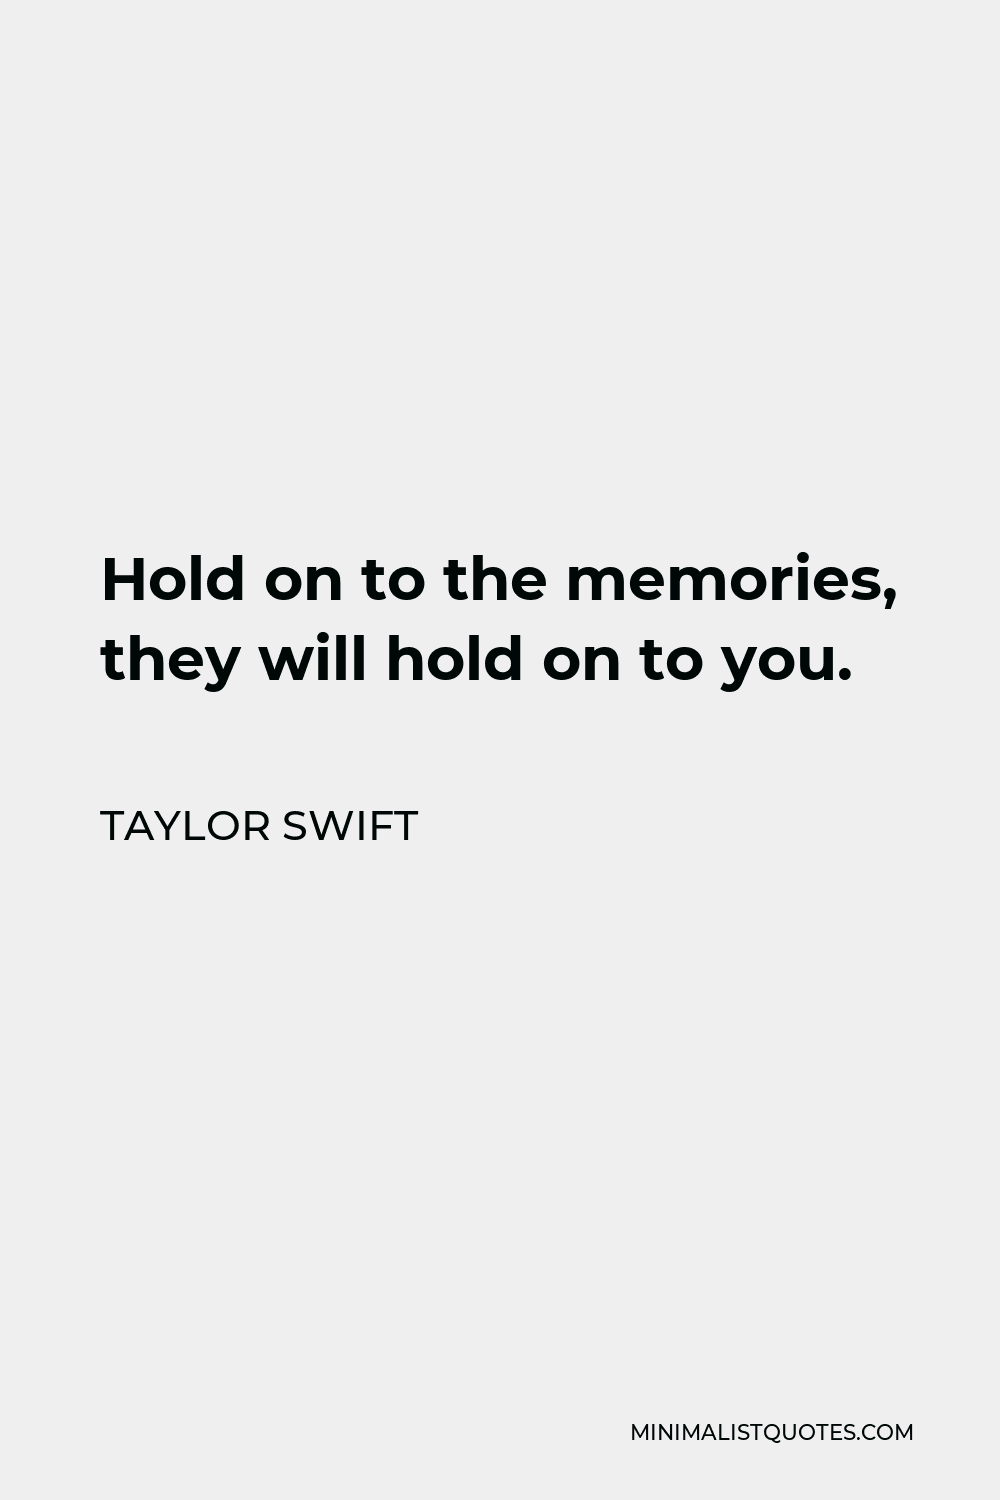 Taylor Swift Quote - Hold on to the memories, they will hold on to you.